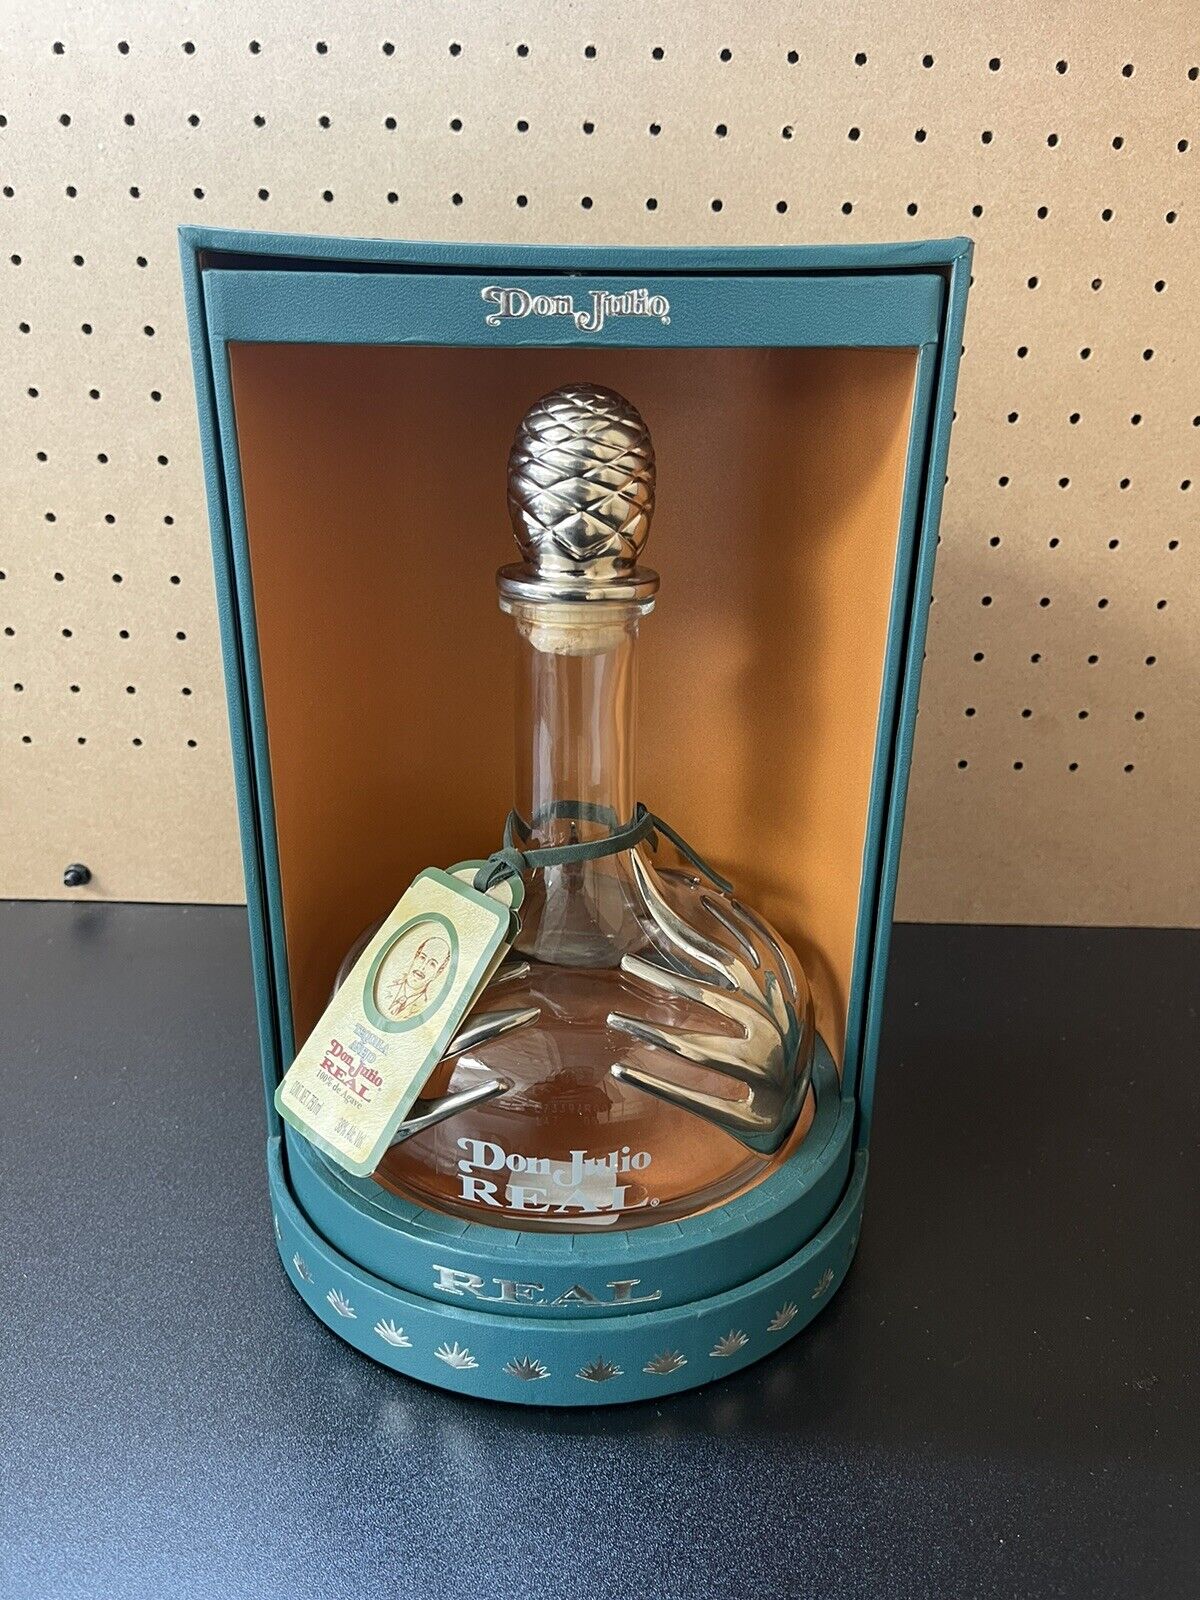 Don Julio Real Tequila From Mexico With Box - Empty Bottle Refillable Very Clean